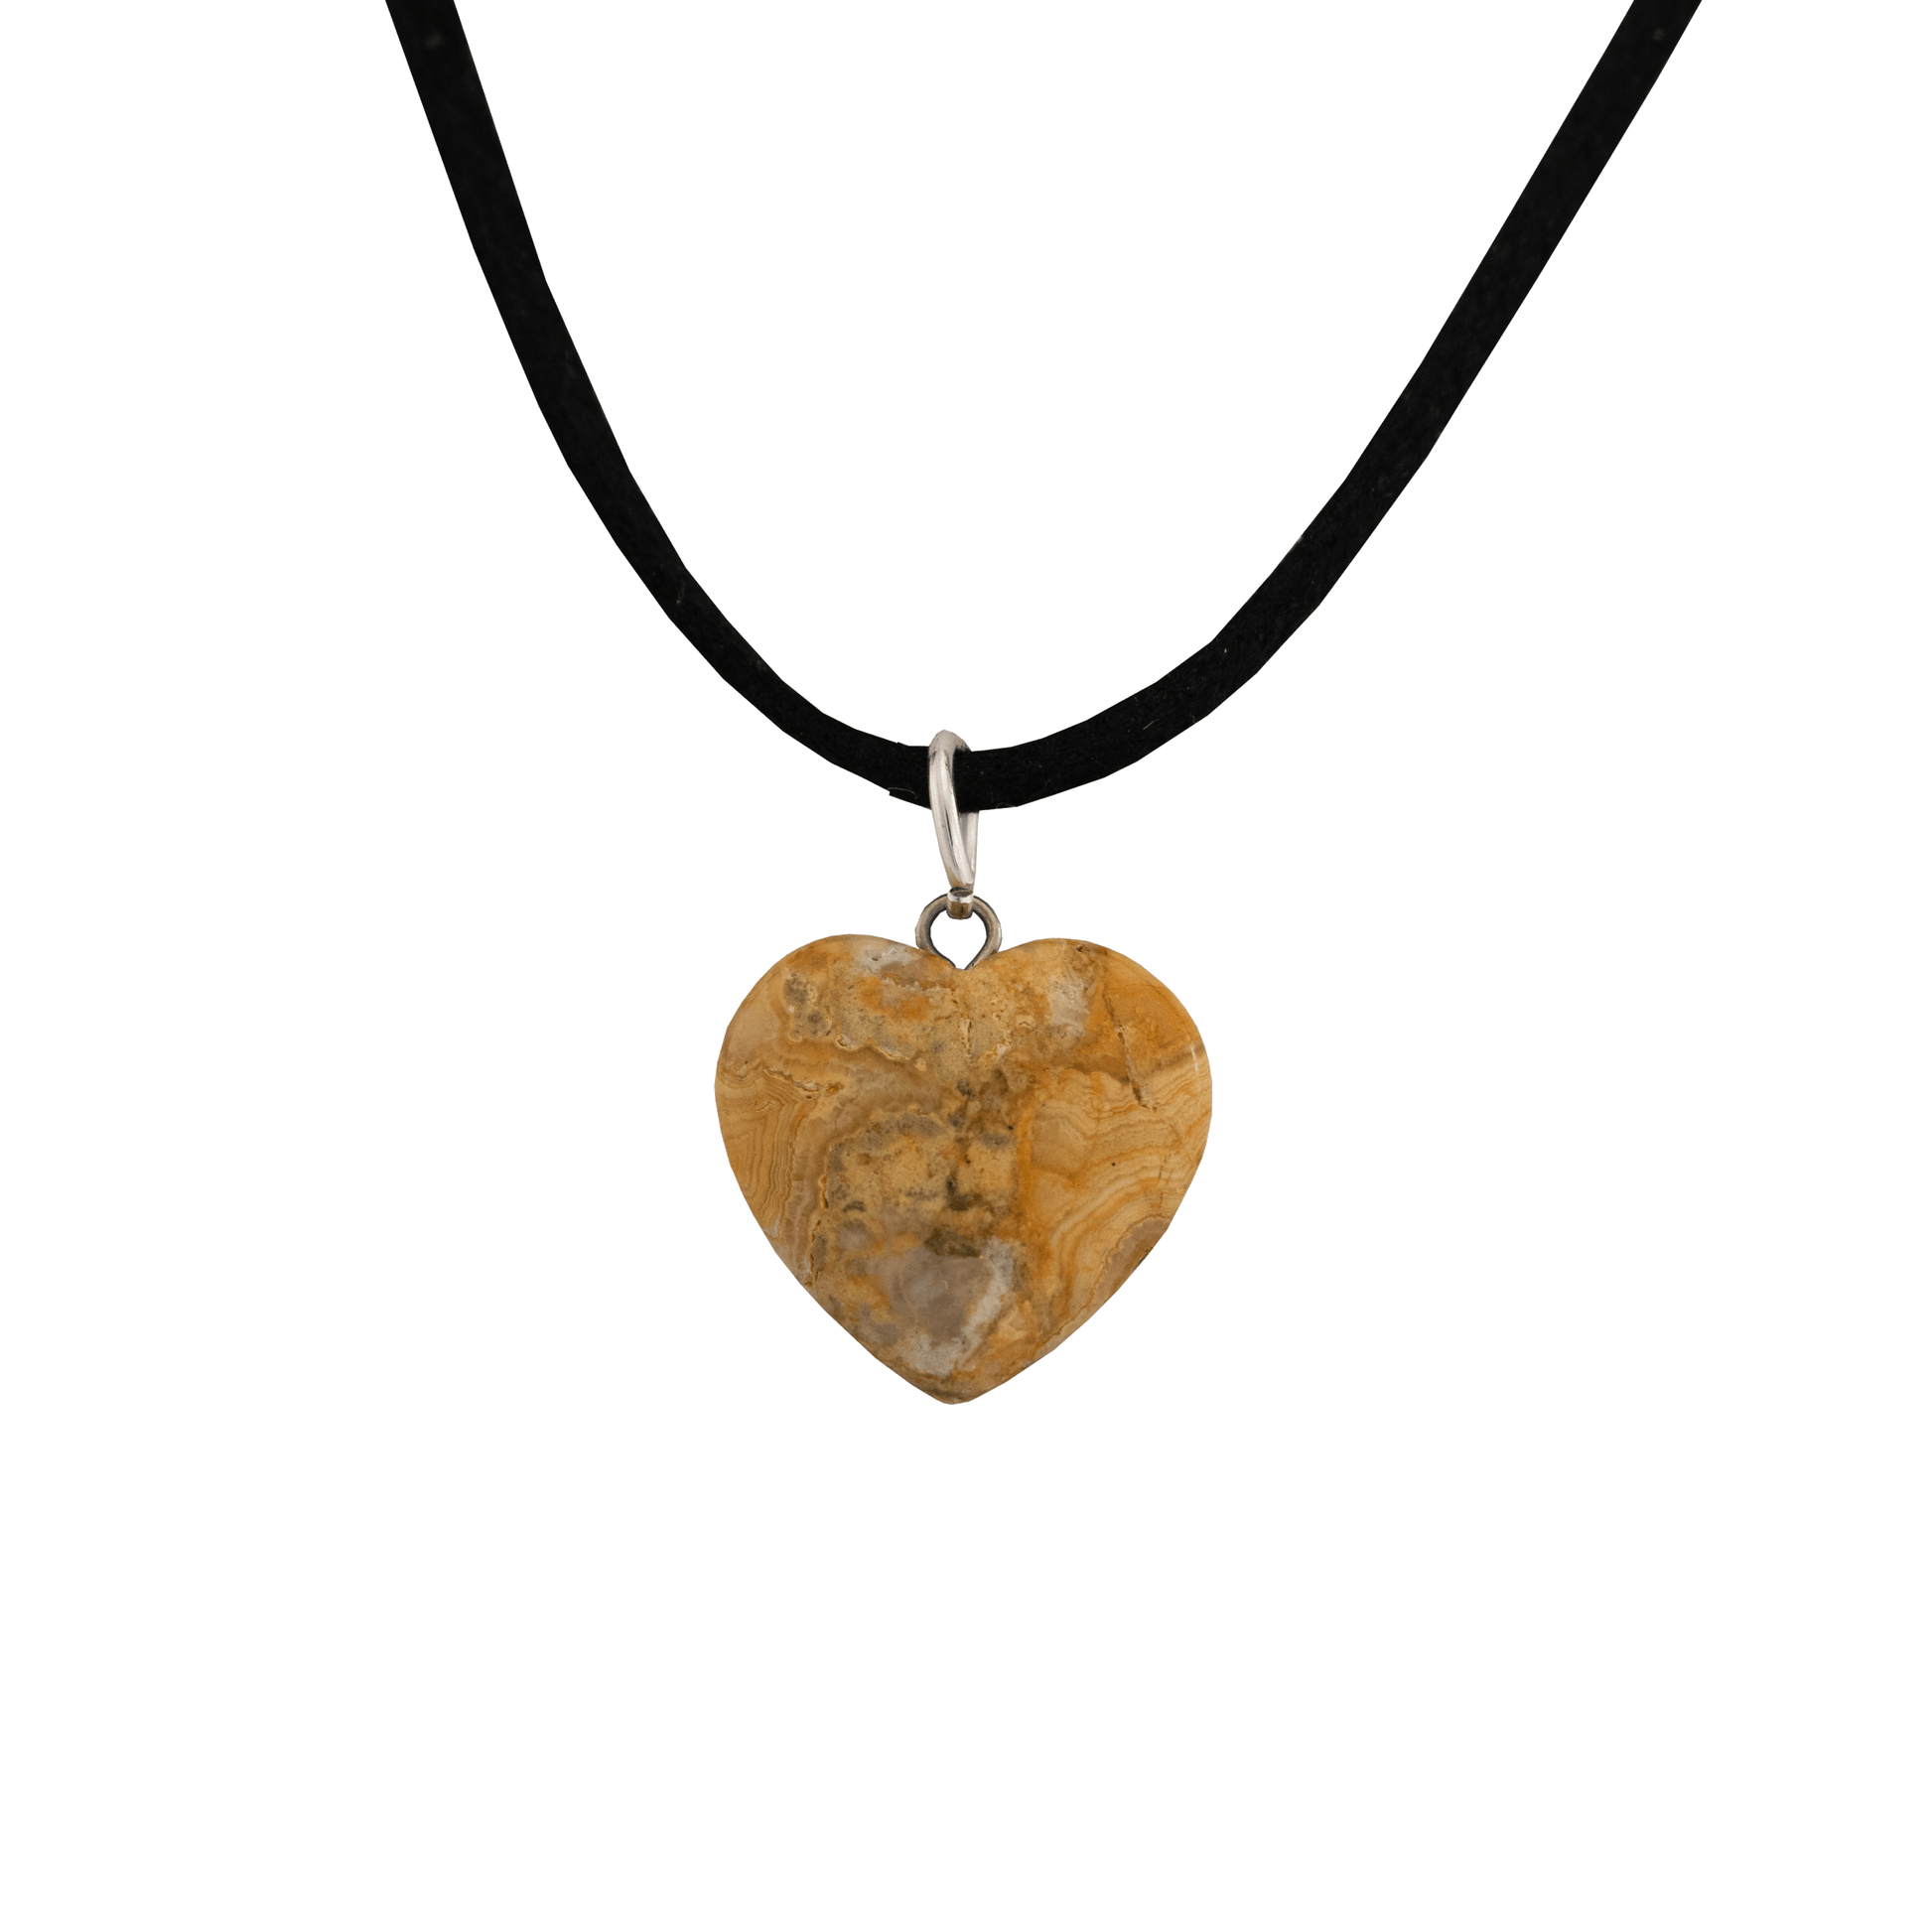 Tan sandy colored Laced Agate heart shaped stone pendant on a black cord